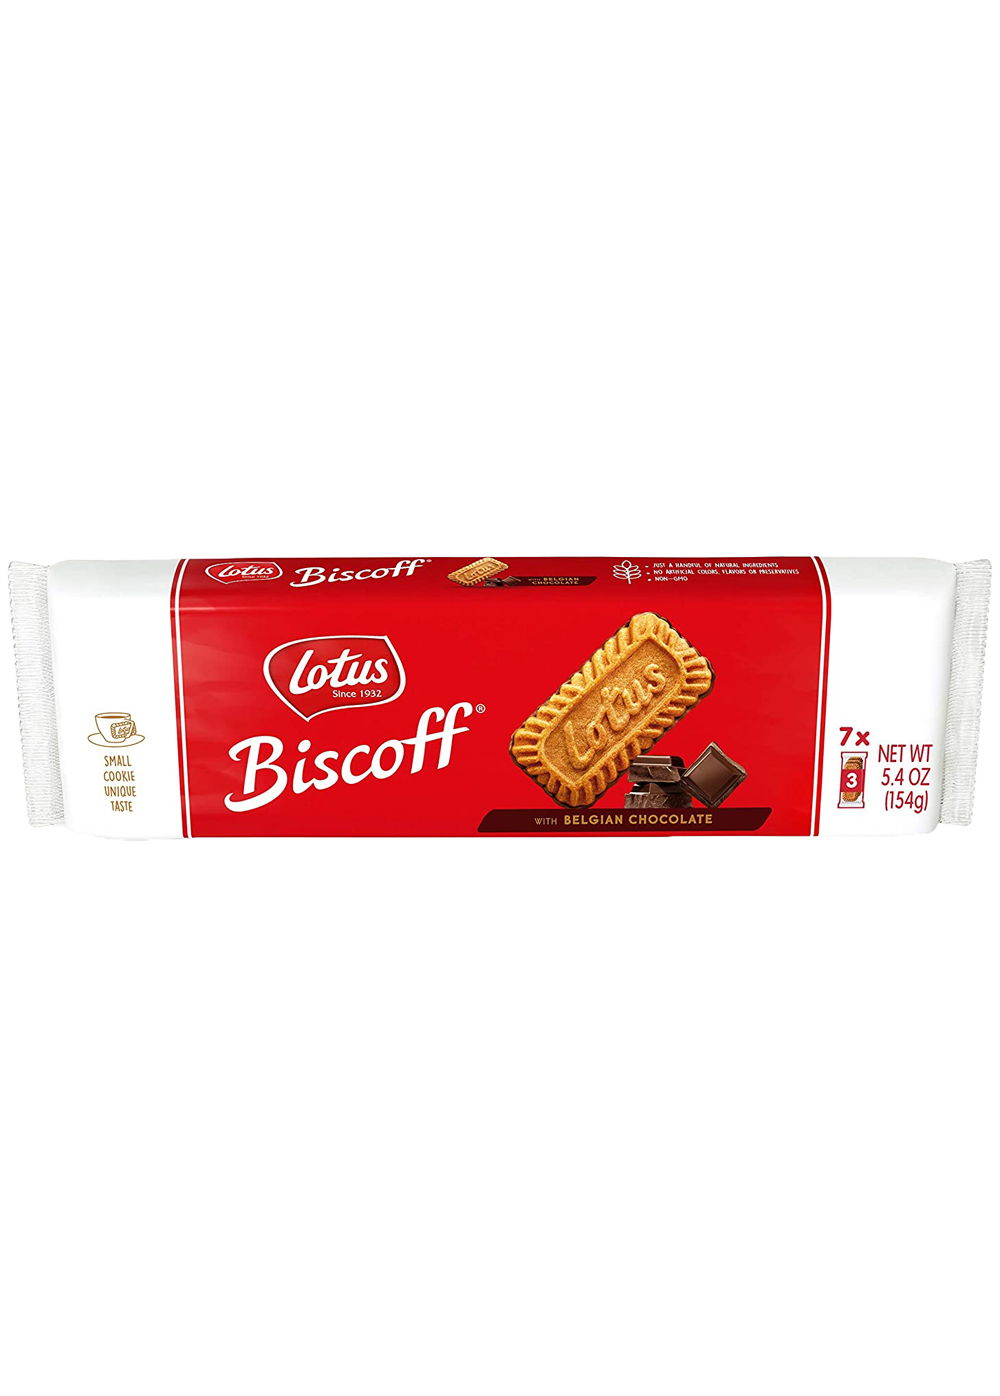 Lotus Biscoff with Belgian Chocolate 154g